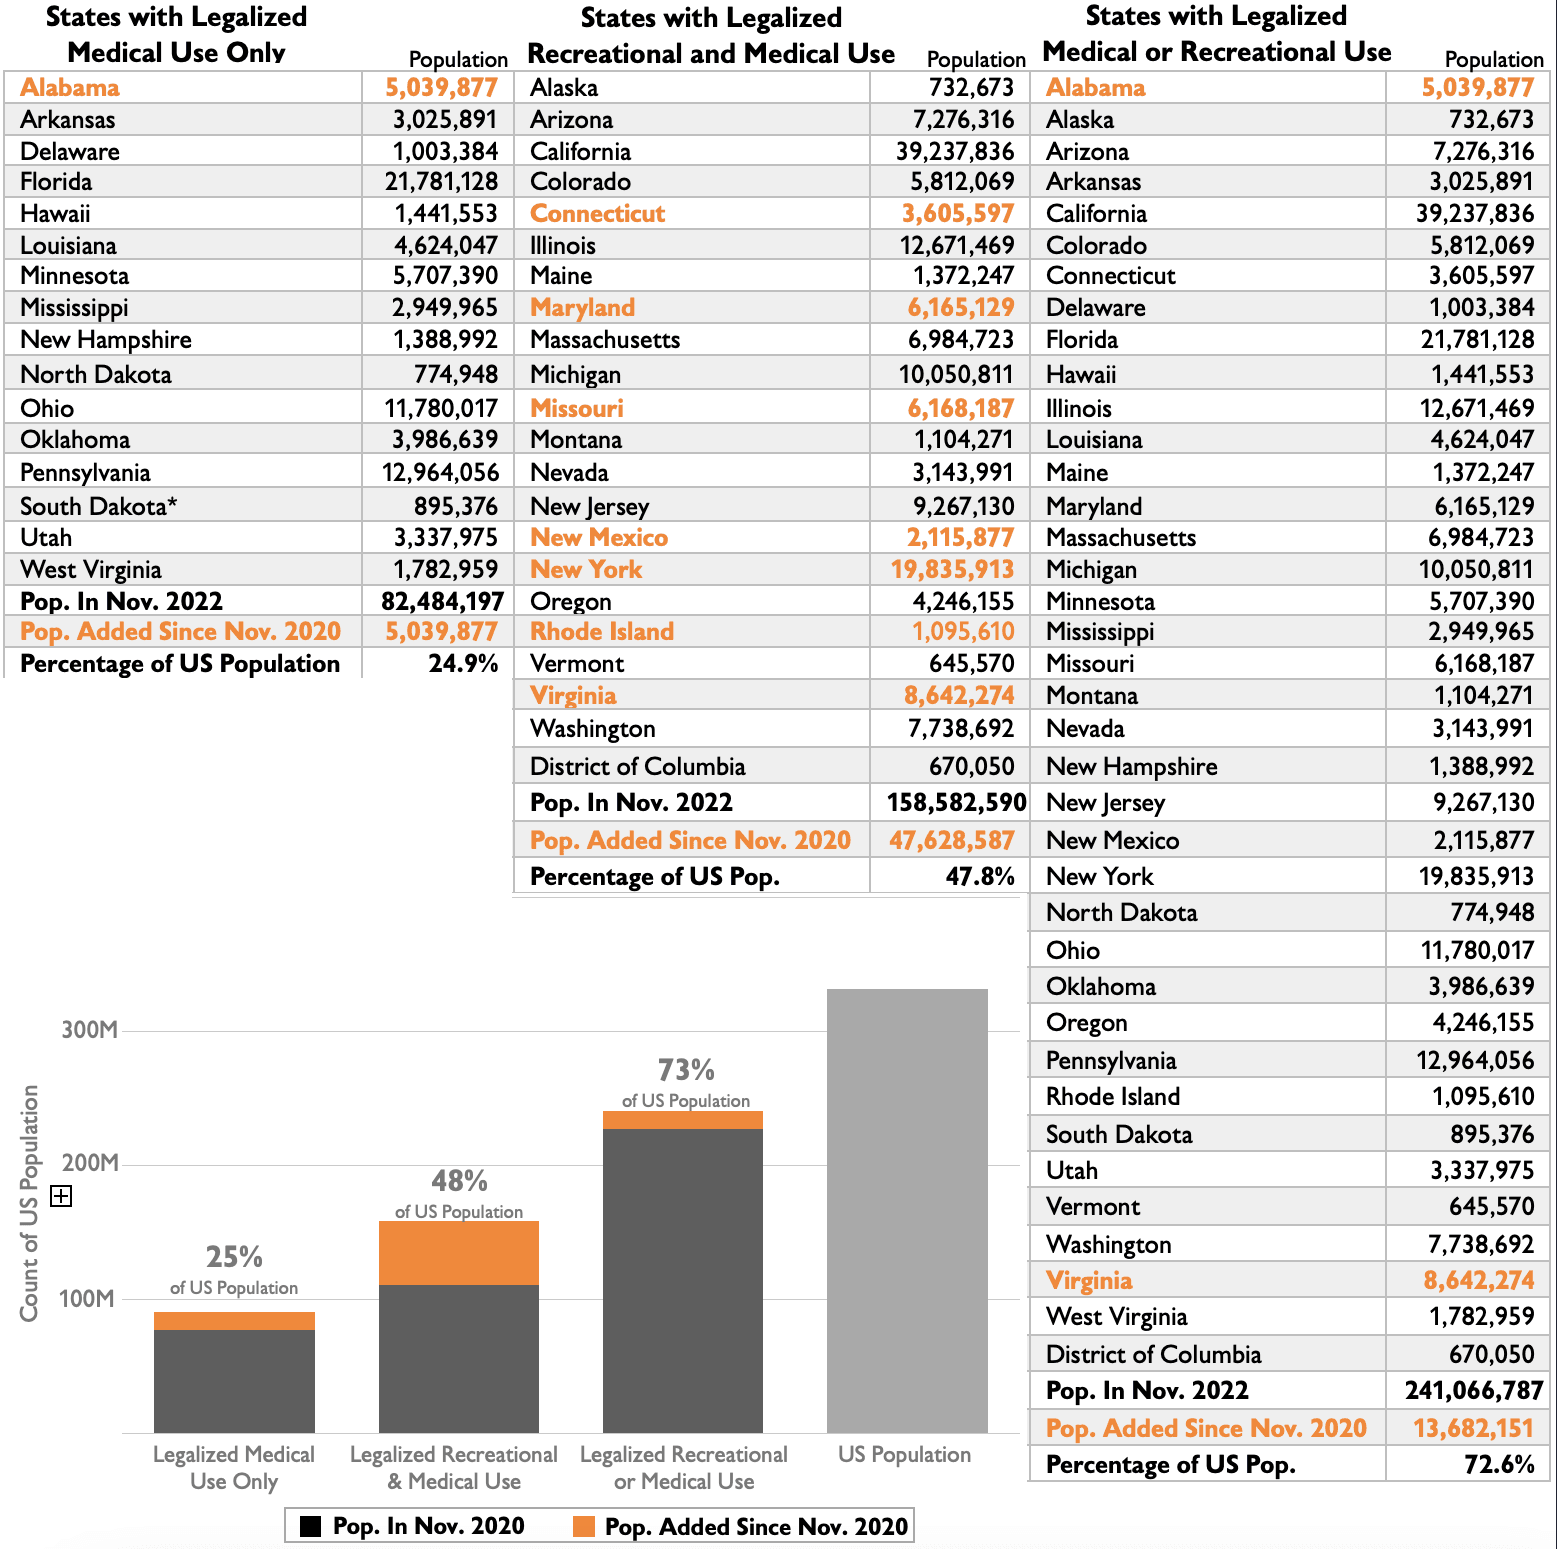 Table - States and Population with Legalized Use - November 2020